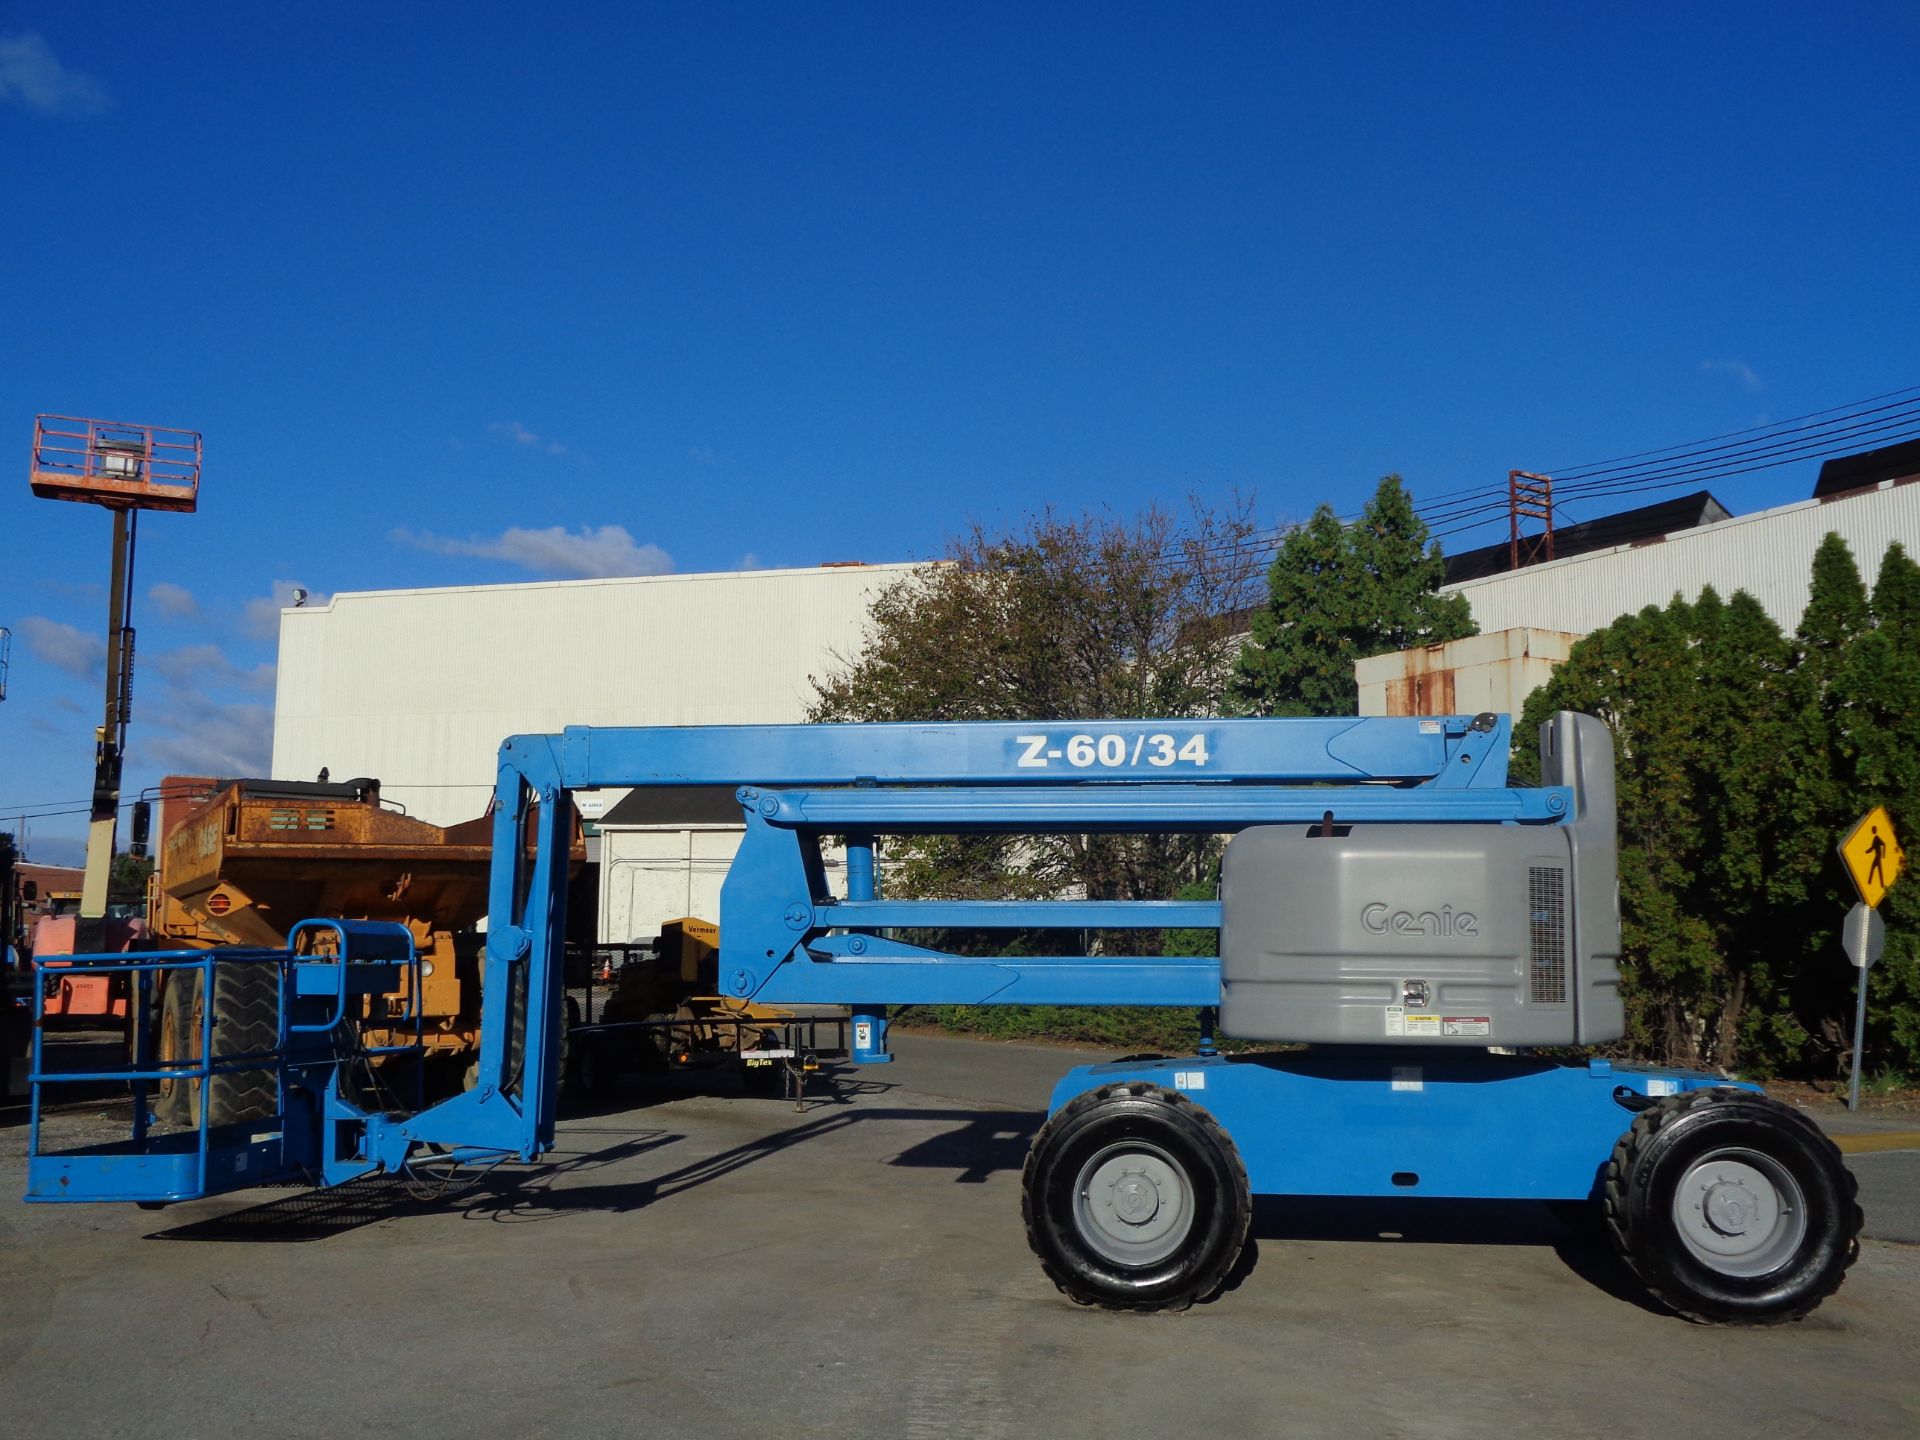 Genie Z60/34- Boom Man Aerial Lift - 4X4 - 60Ft Height - Image 16 of 18